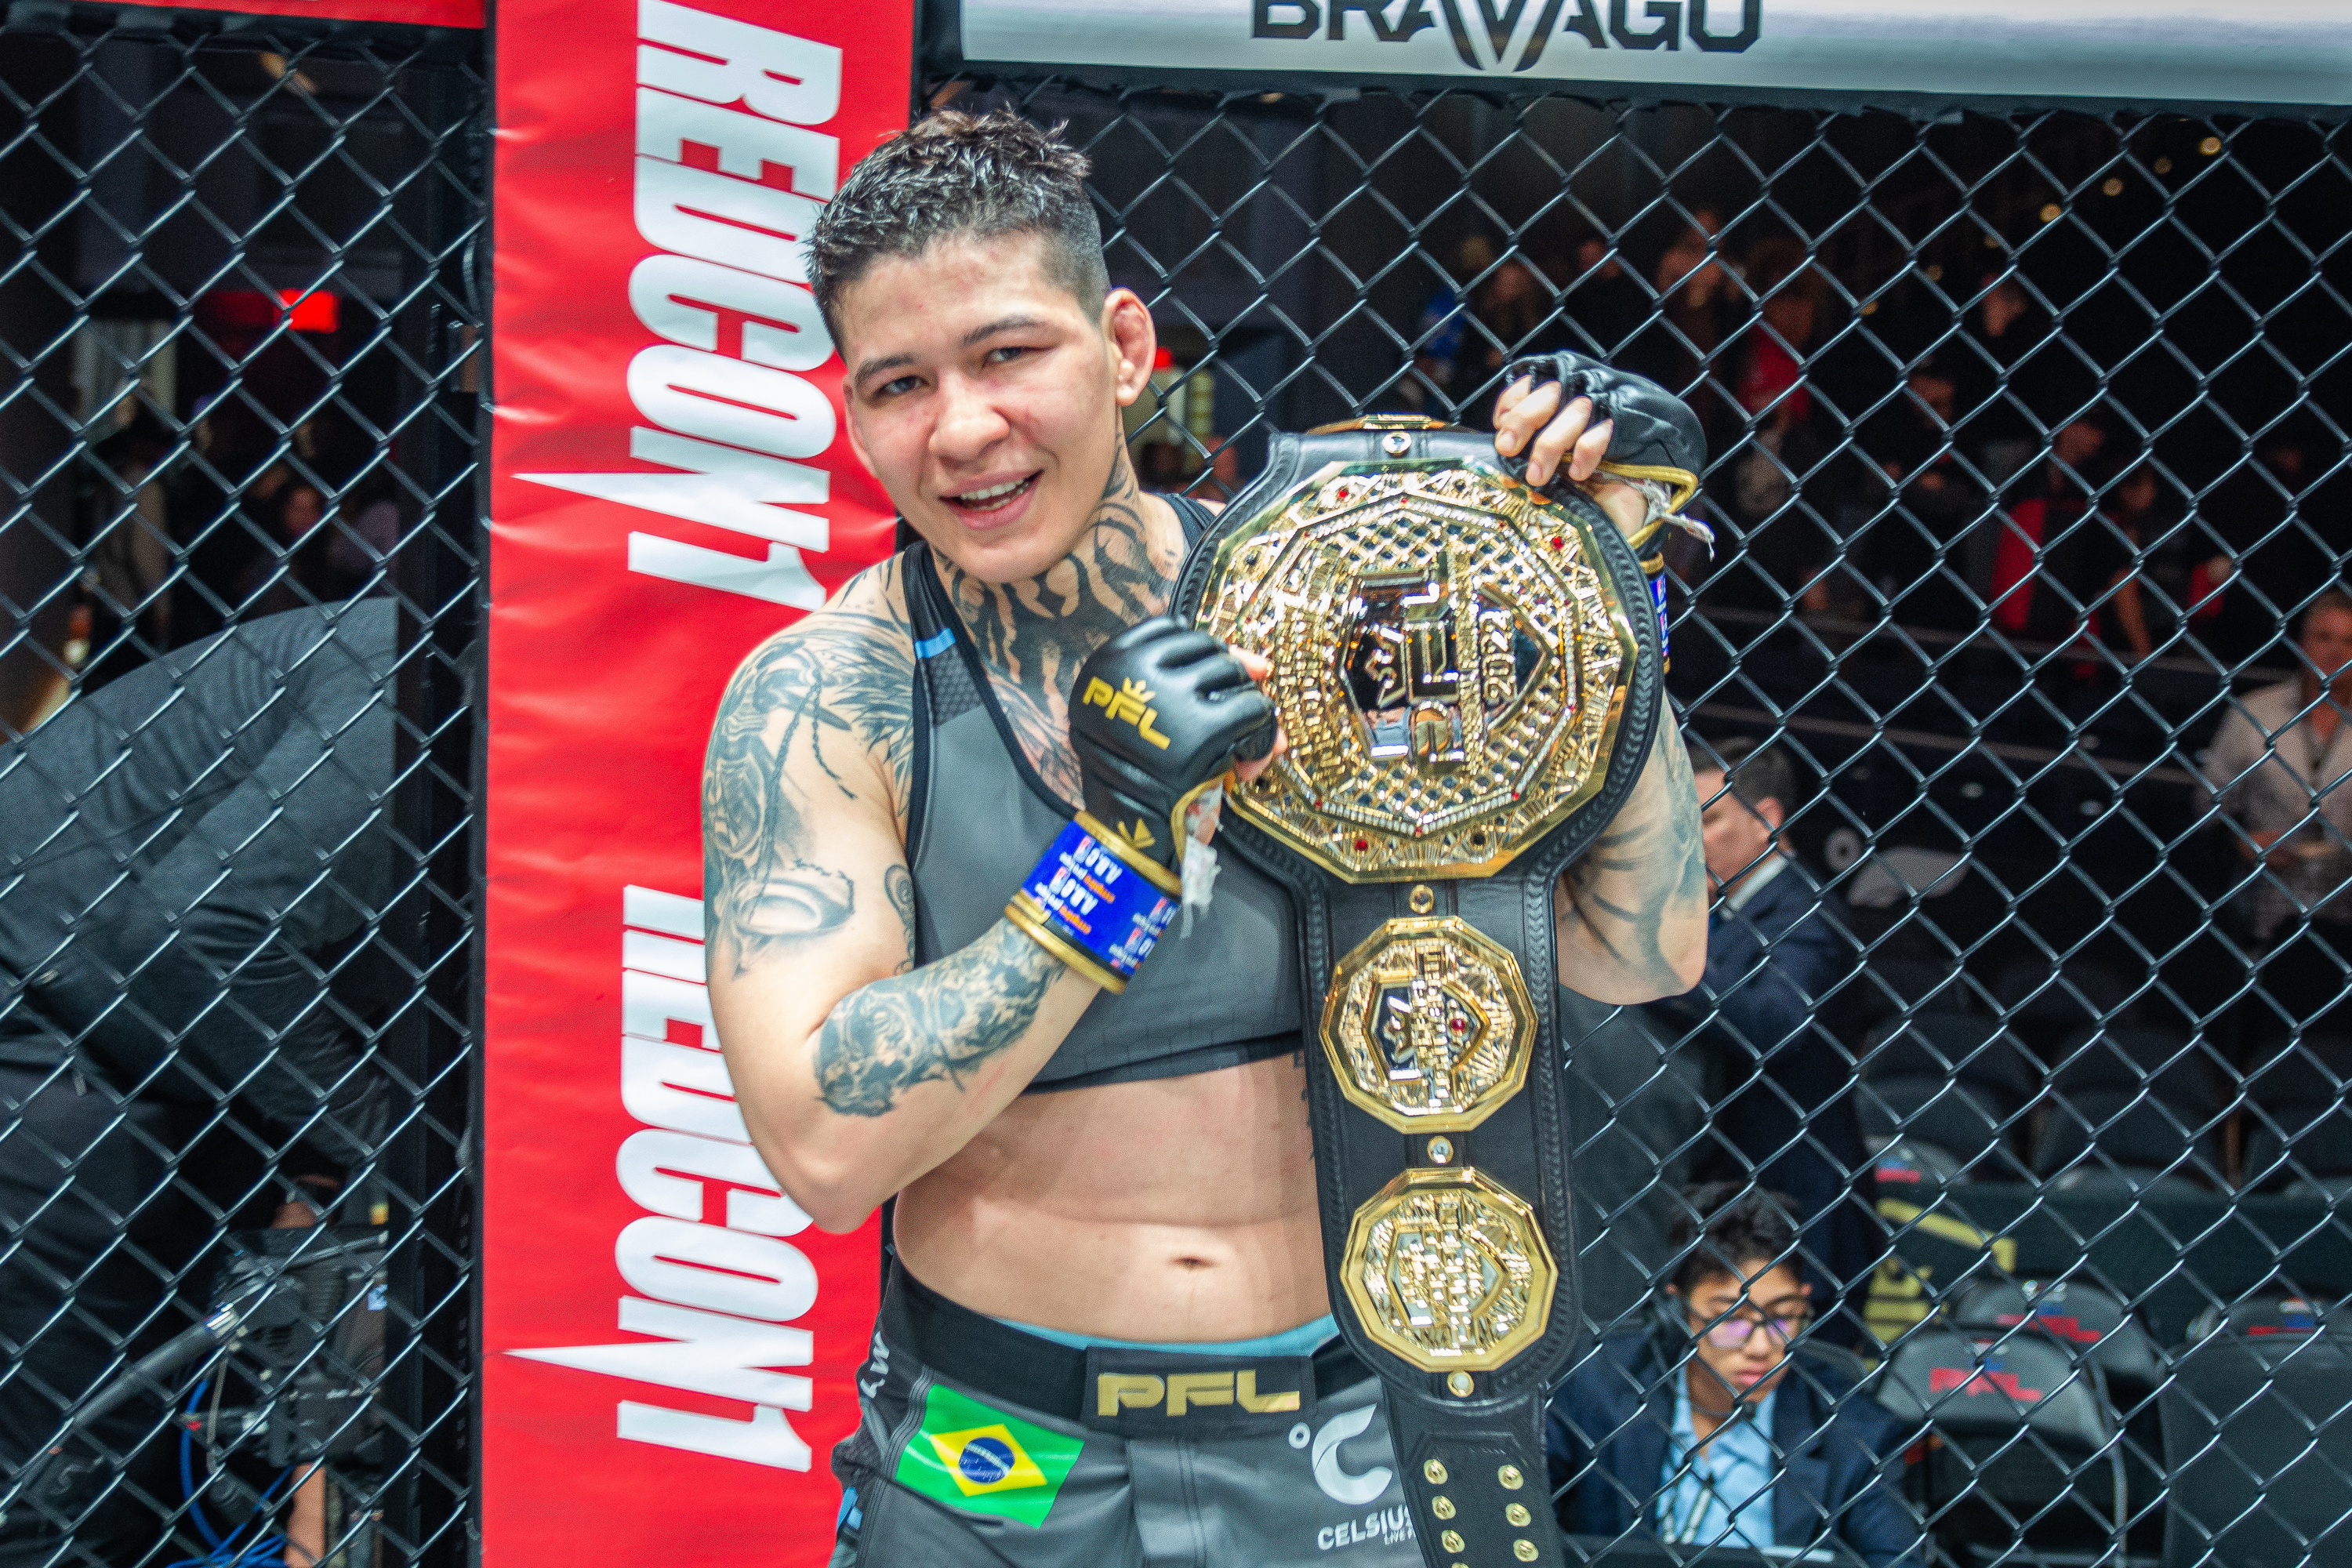 Larissa Pacheco became the PFL’s women’s lightweight champion in November 2022.